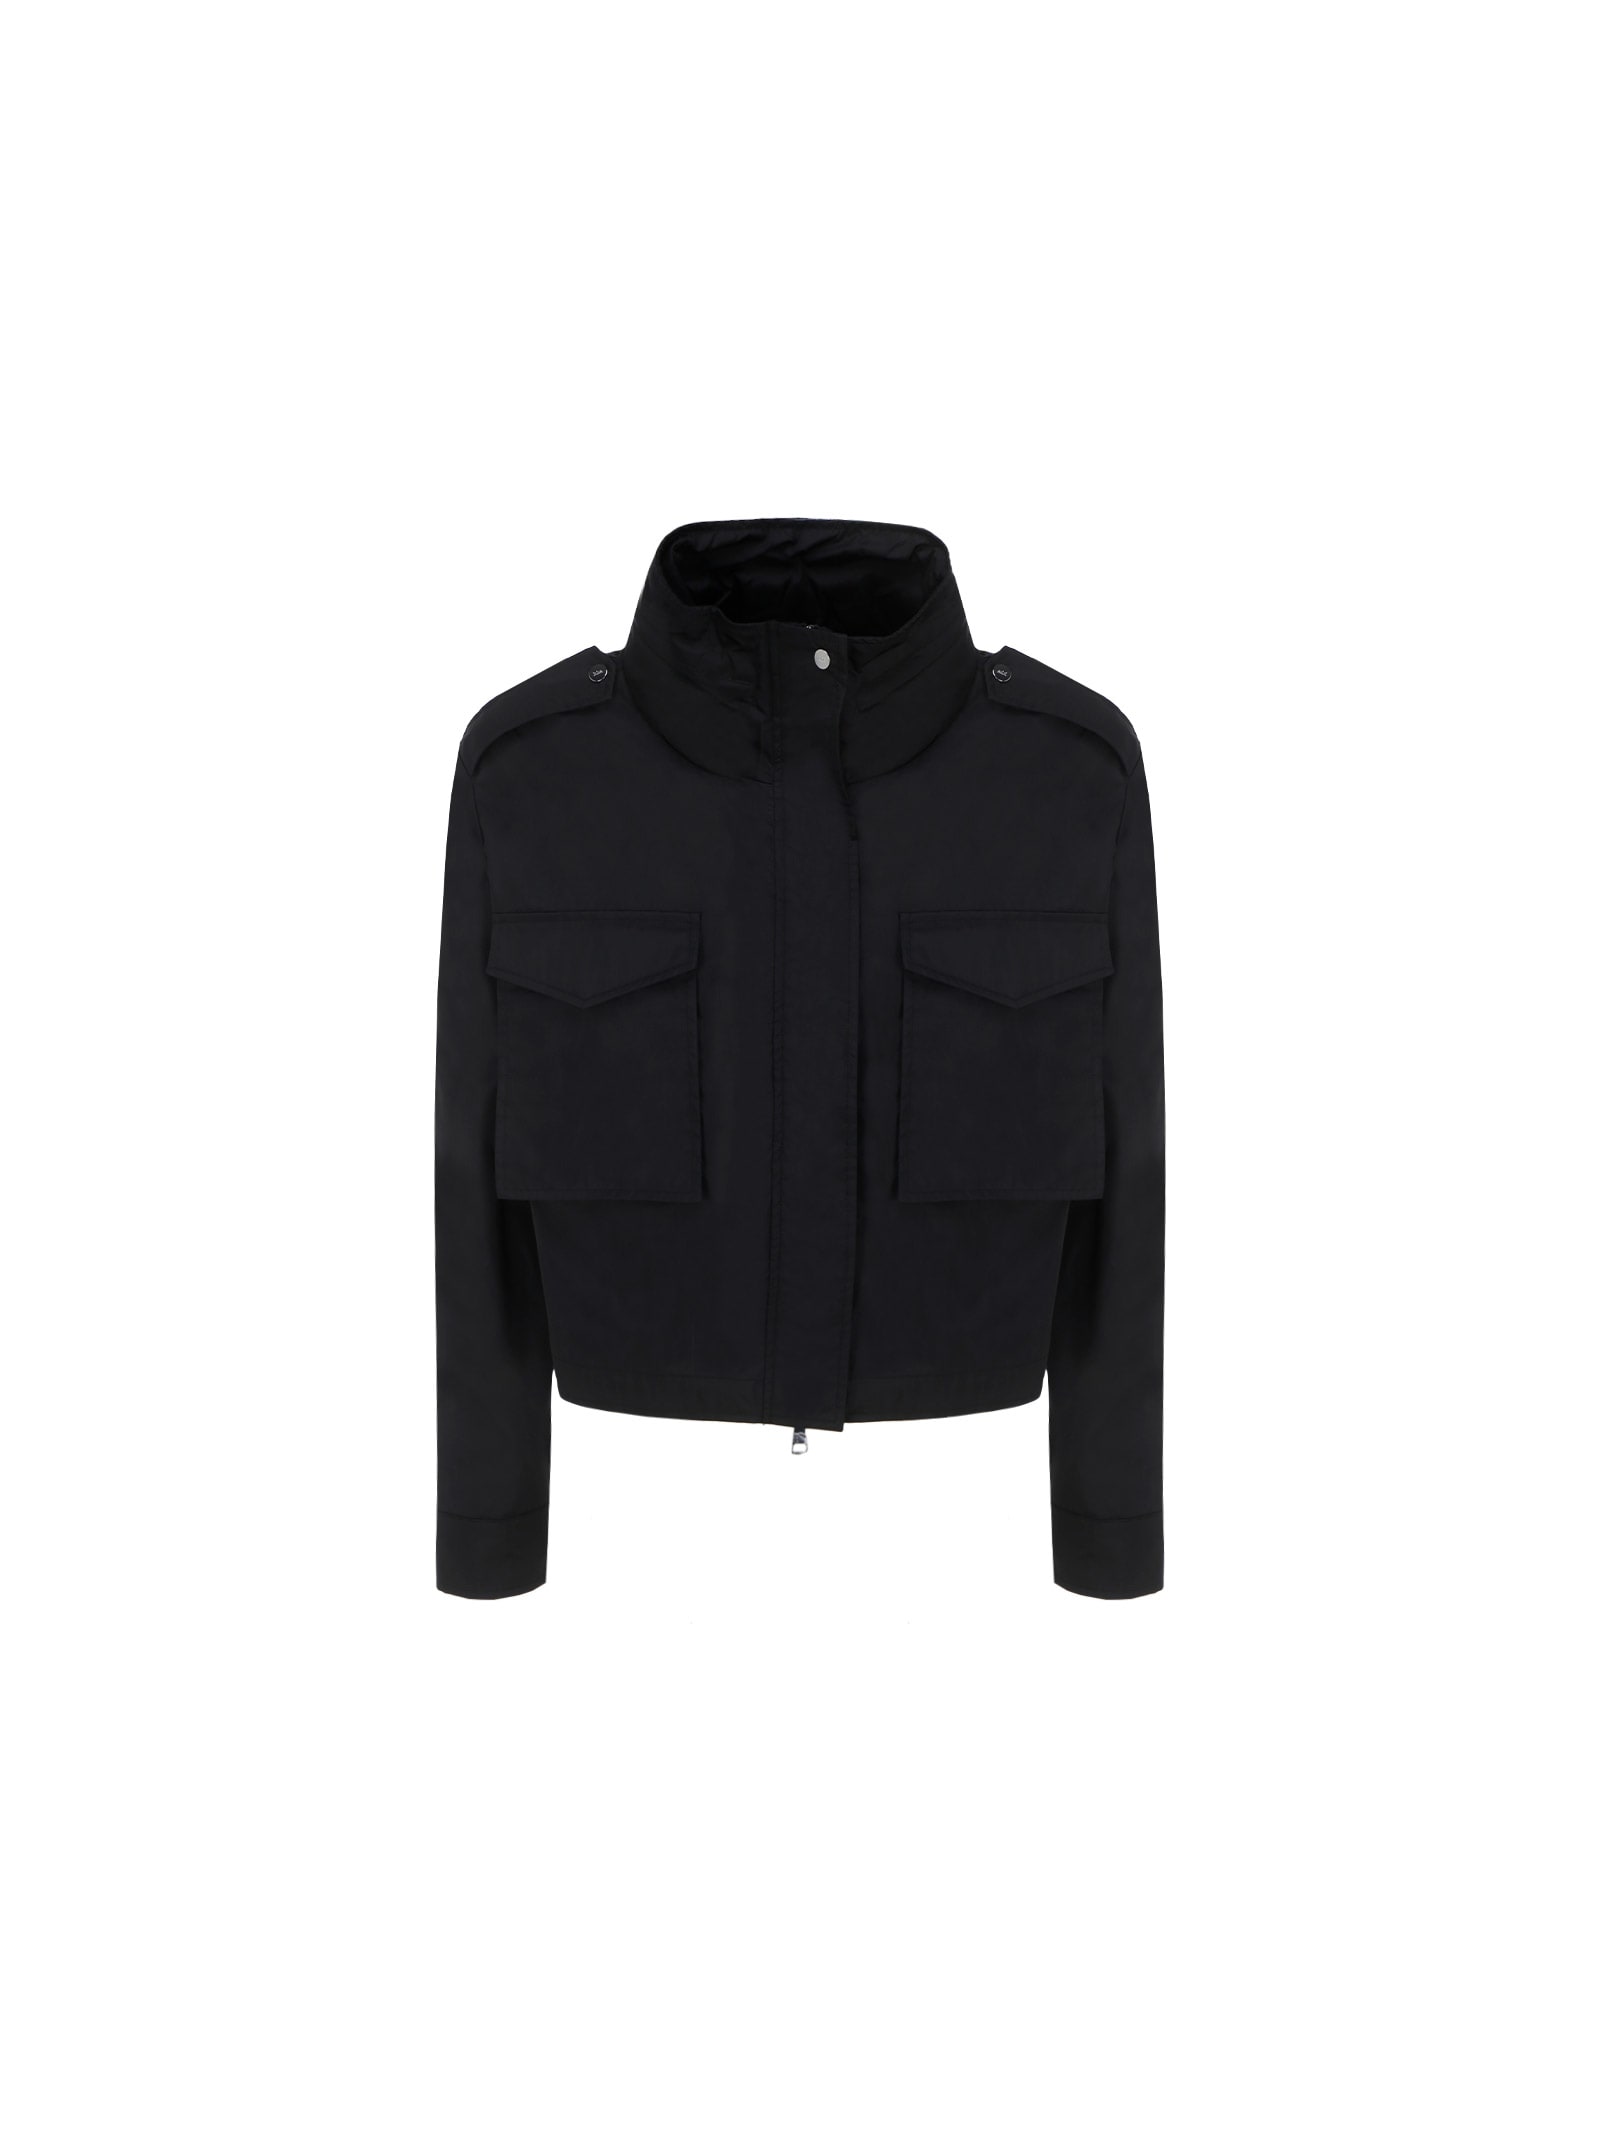 Add Women's 5aw0018506 Black Other Materials Outerwear Jacket